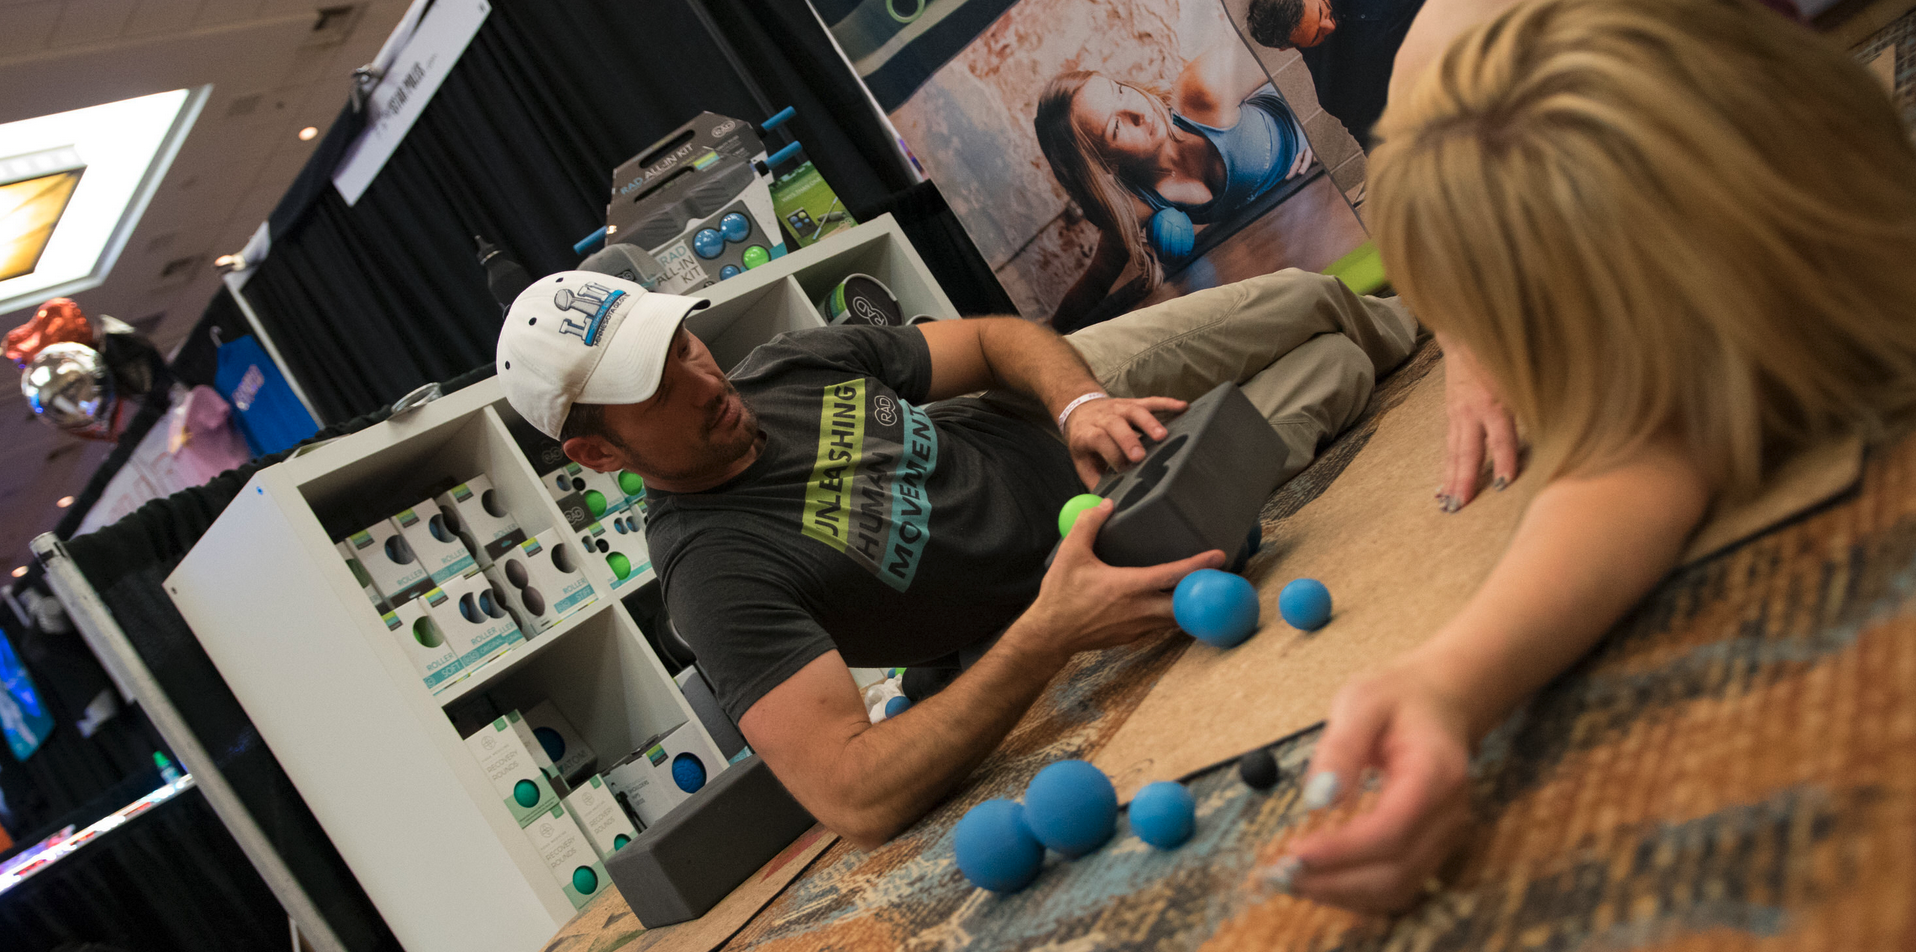 Vendor explains yoga ball and peanut to customer at a booth.